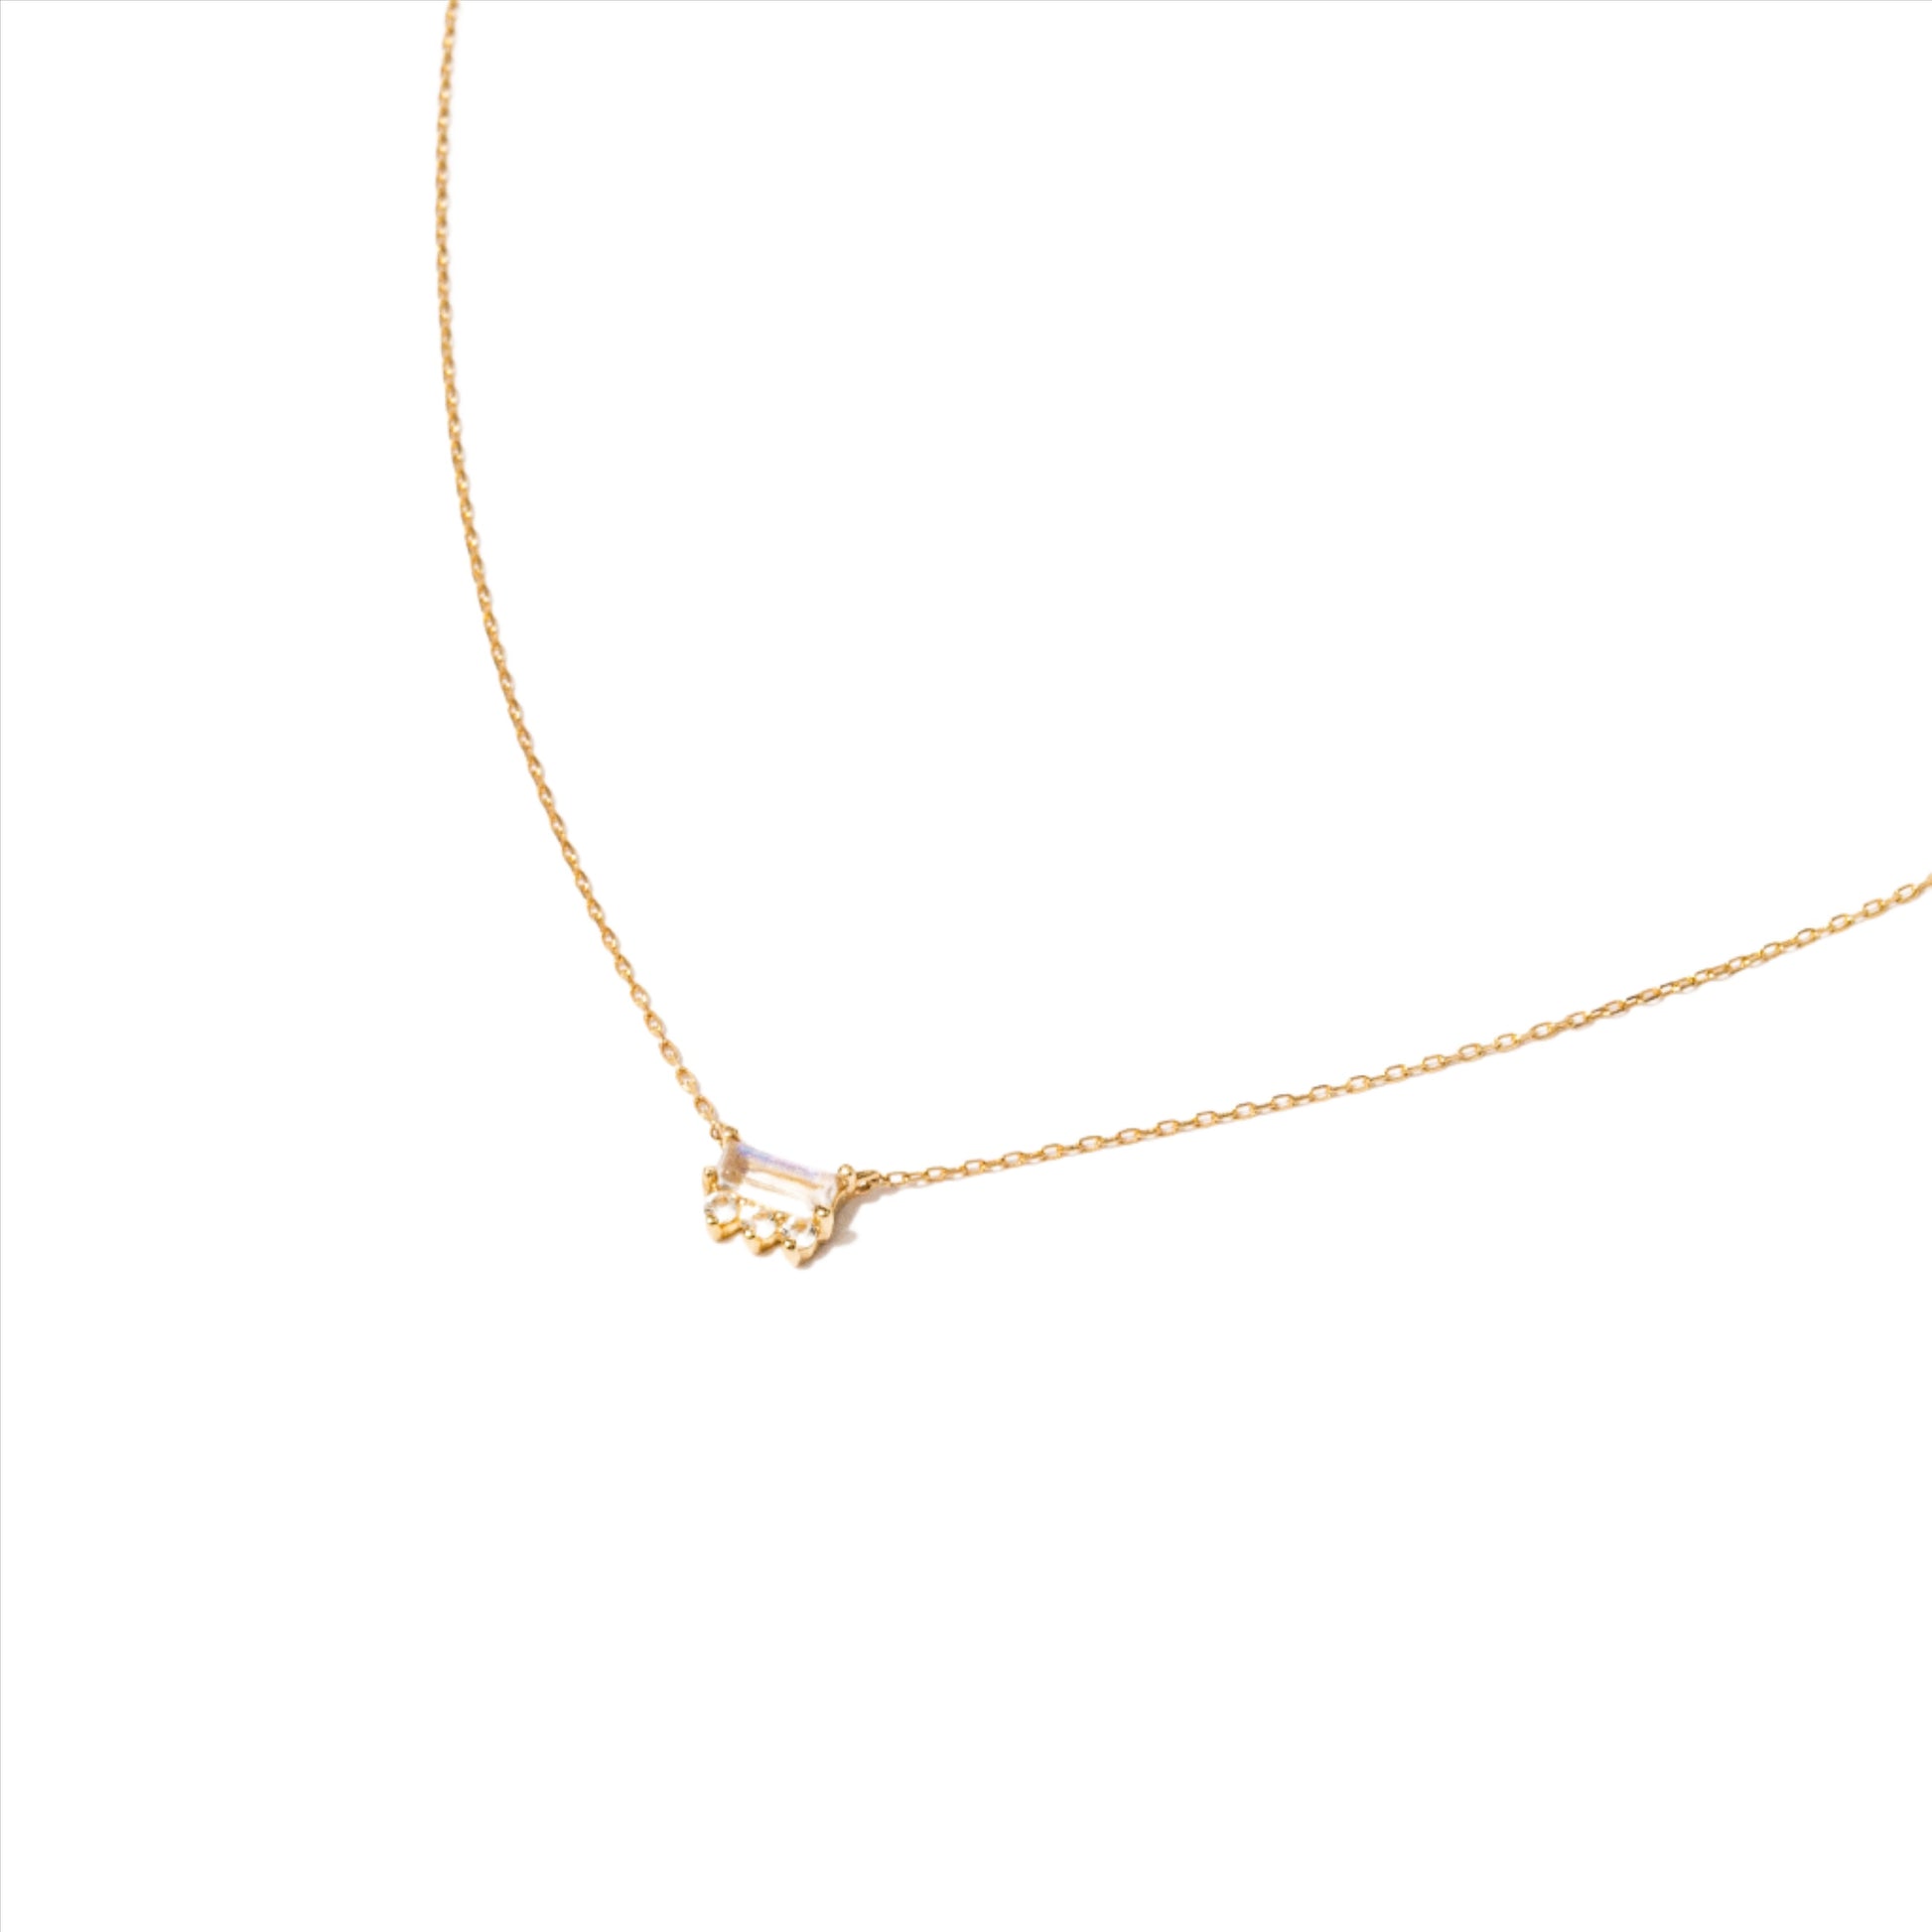 White Sapphire Necklace 14K Gold